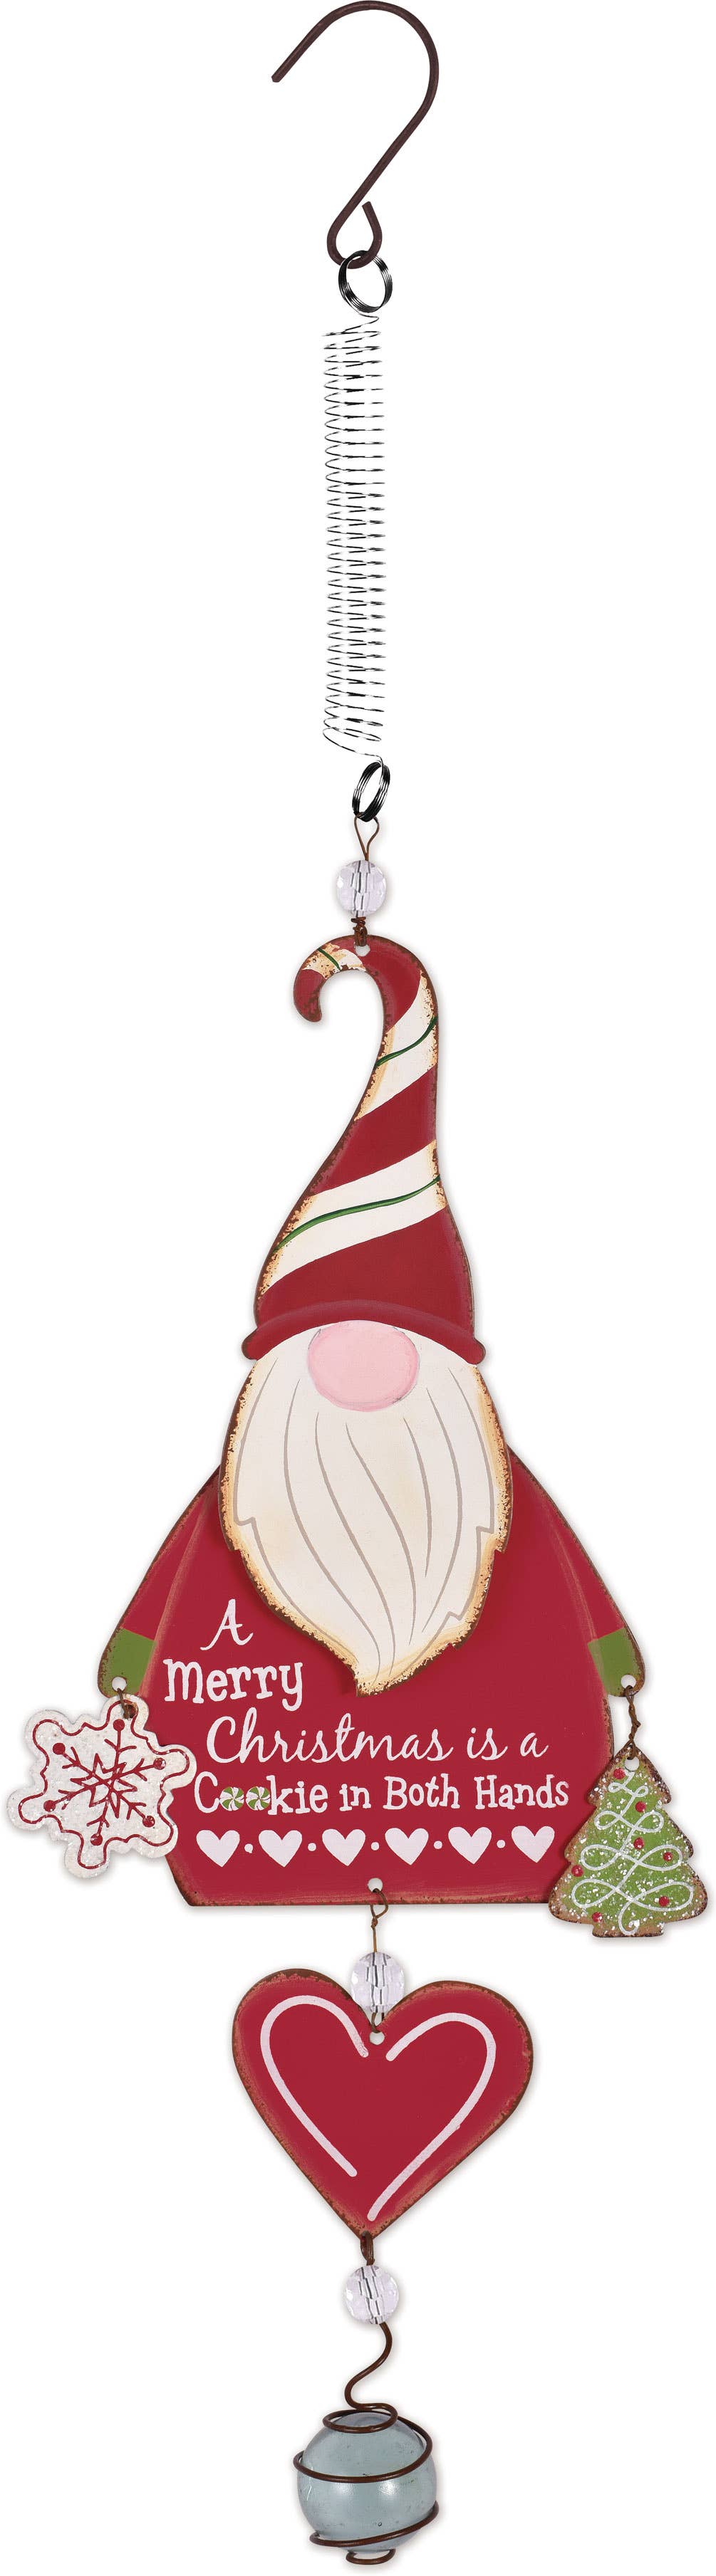 Gnome Cookie Bouncy Ornament